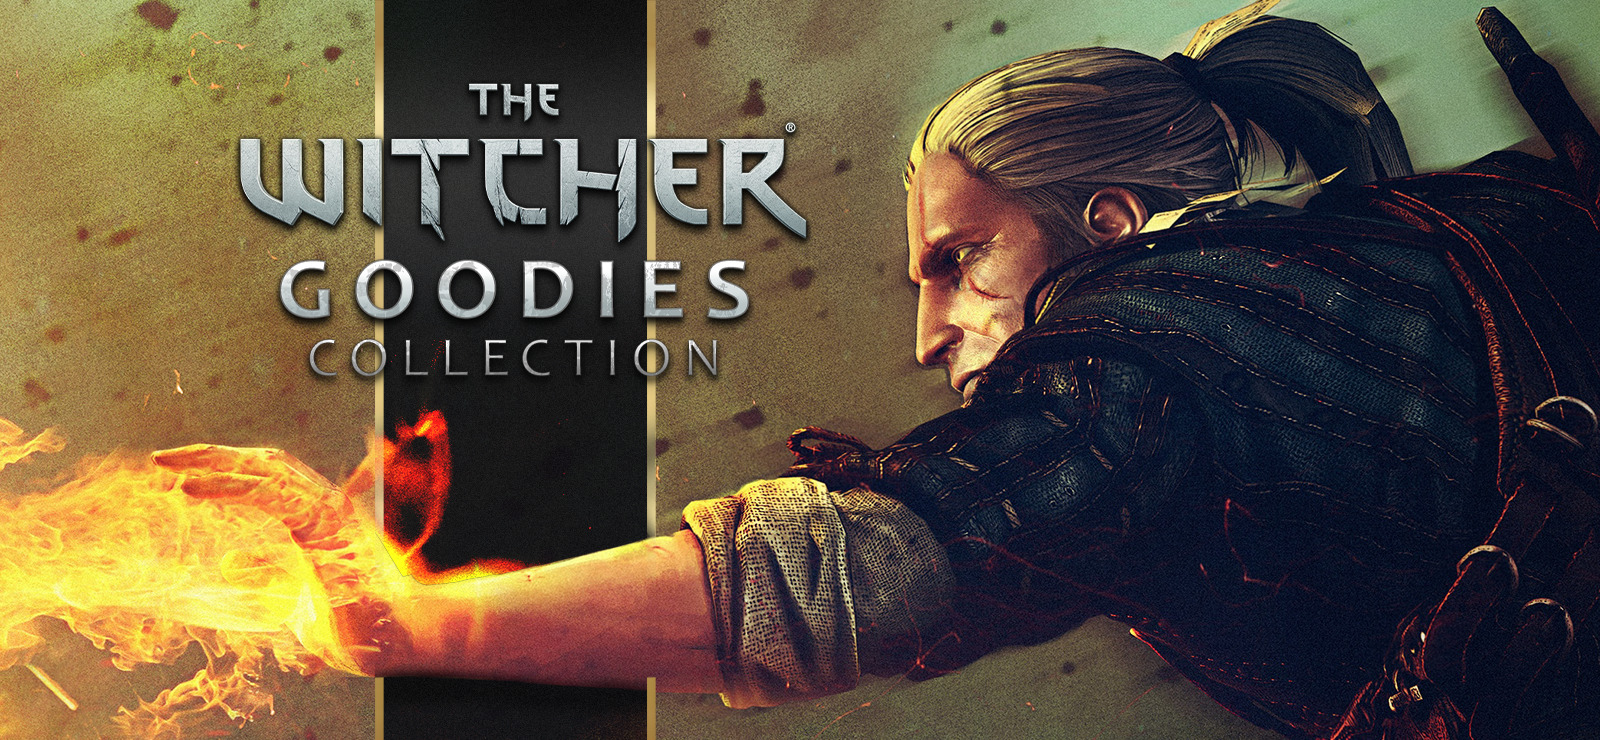 The Witcher - Goodies Collection GOG CD Key USD 2.54